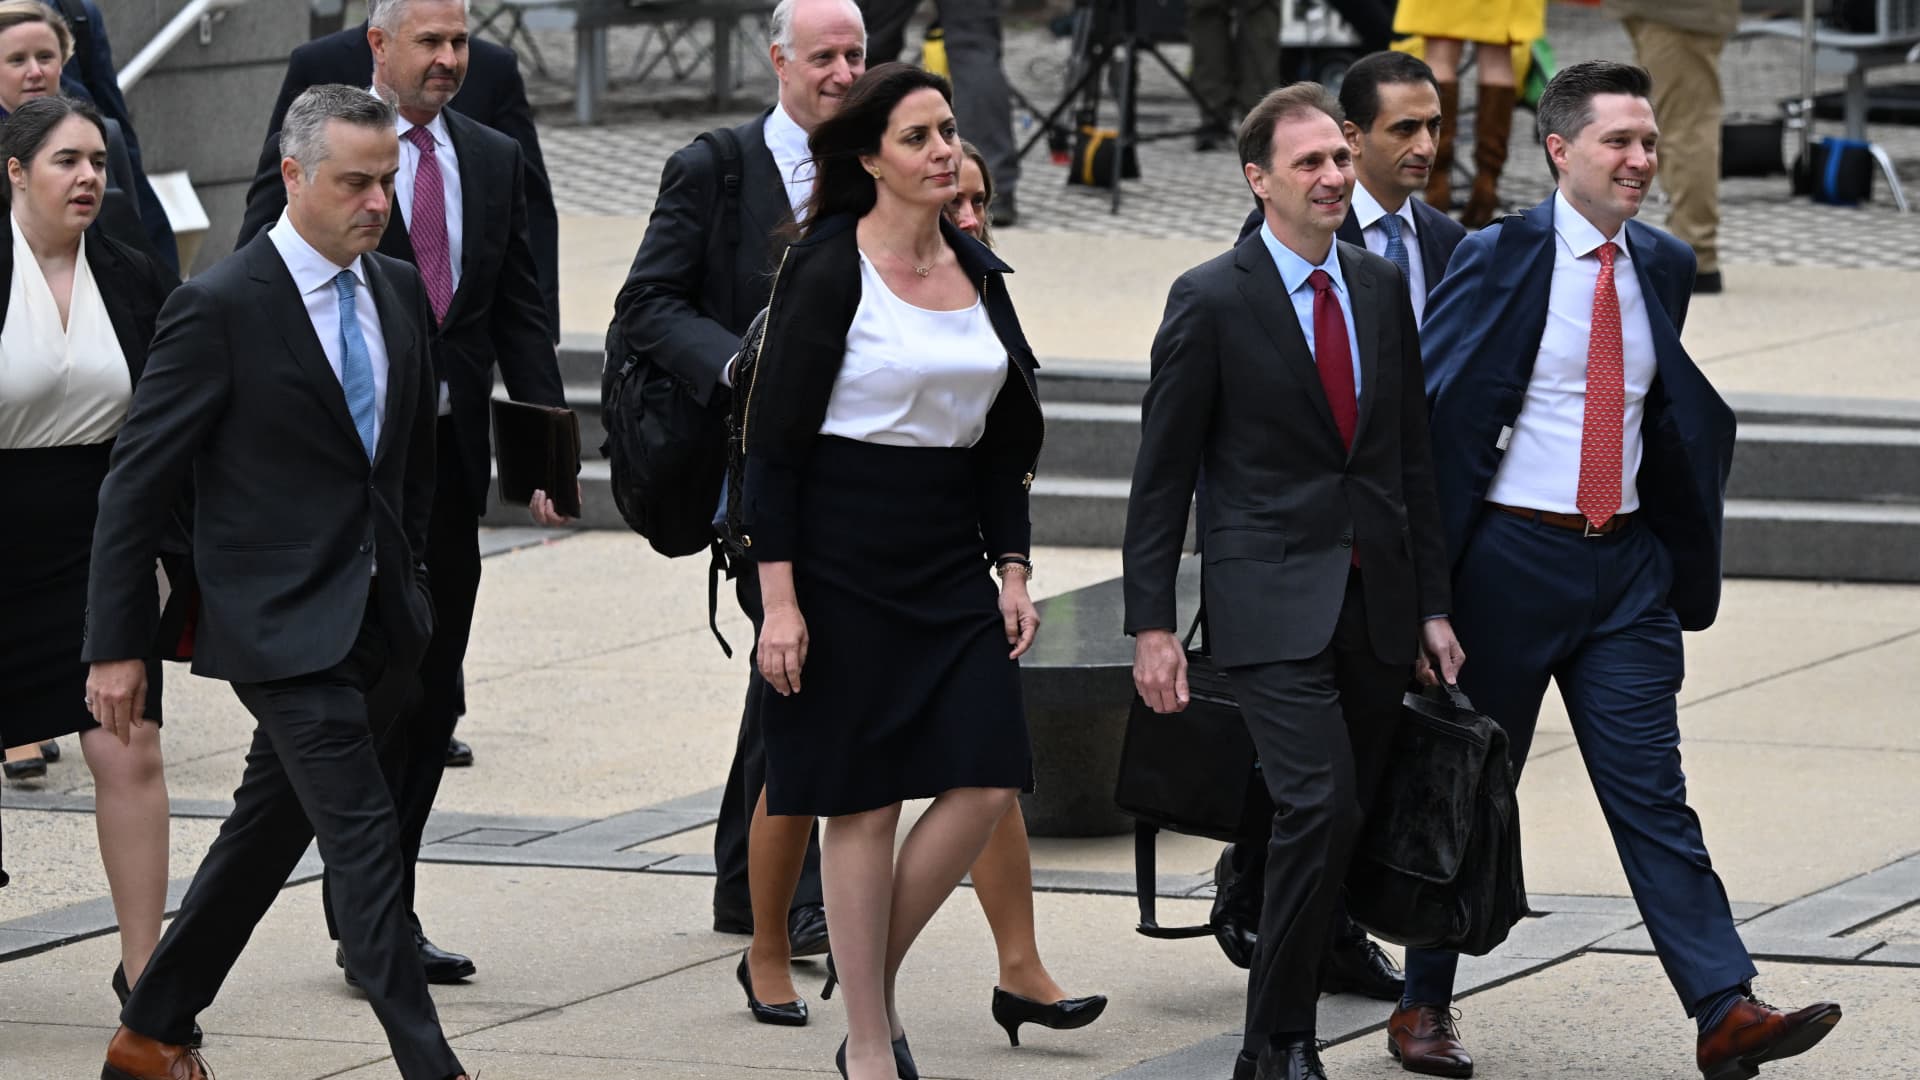 Lawyers for Dominion Voting Systems and their legal team arrive at the Leonard Williams Justice Center where the Dominion Voting Systems defamation trial against FOX News is taking place on April 18, 2023 in Wilmington, Delaware.